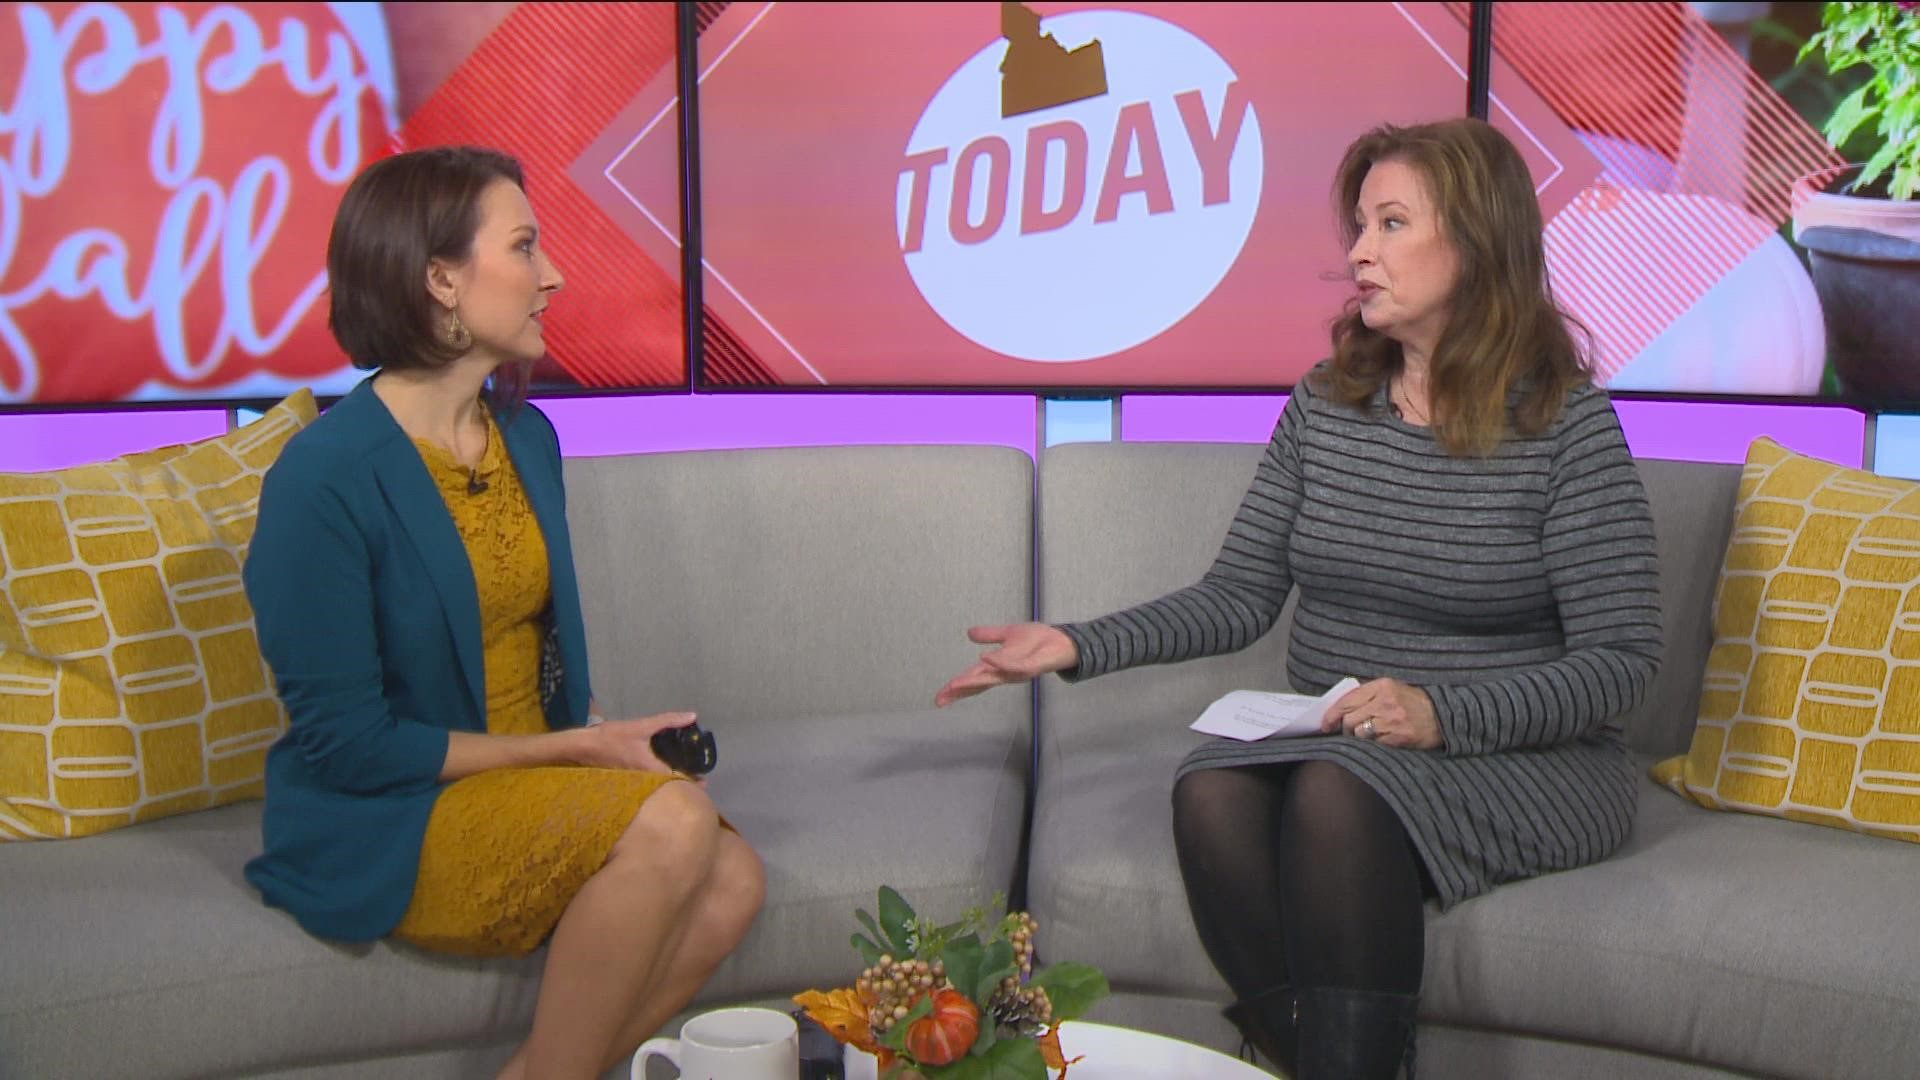 April Neale shares what to watch on TV this Thanksgiving Day!